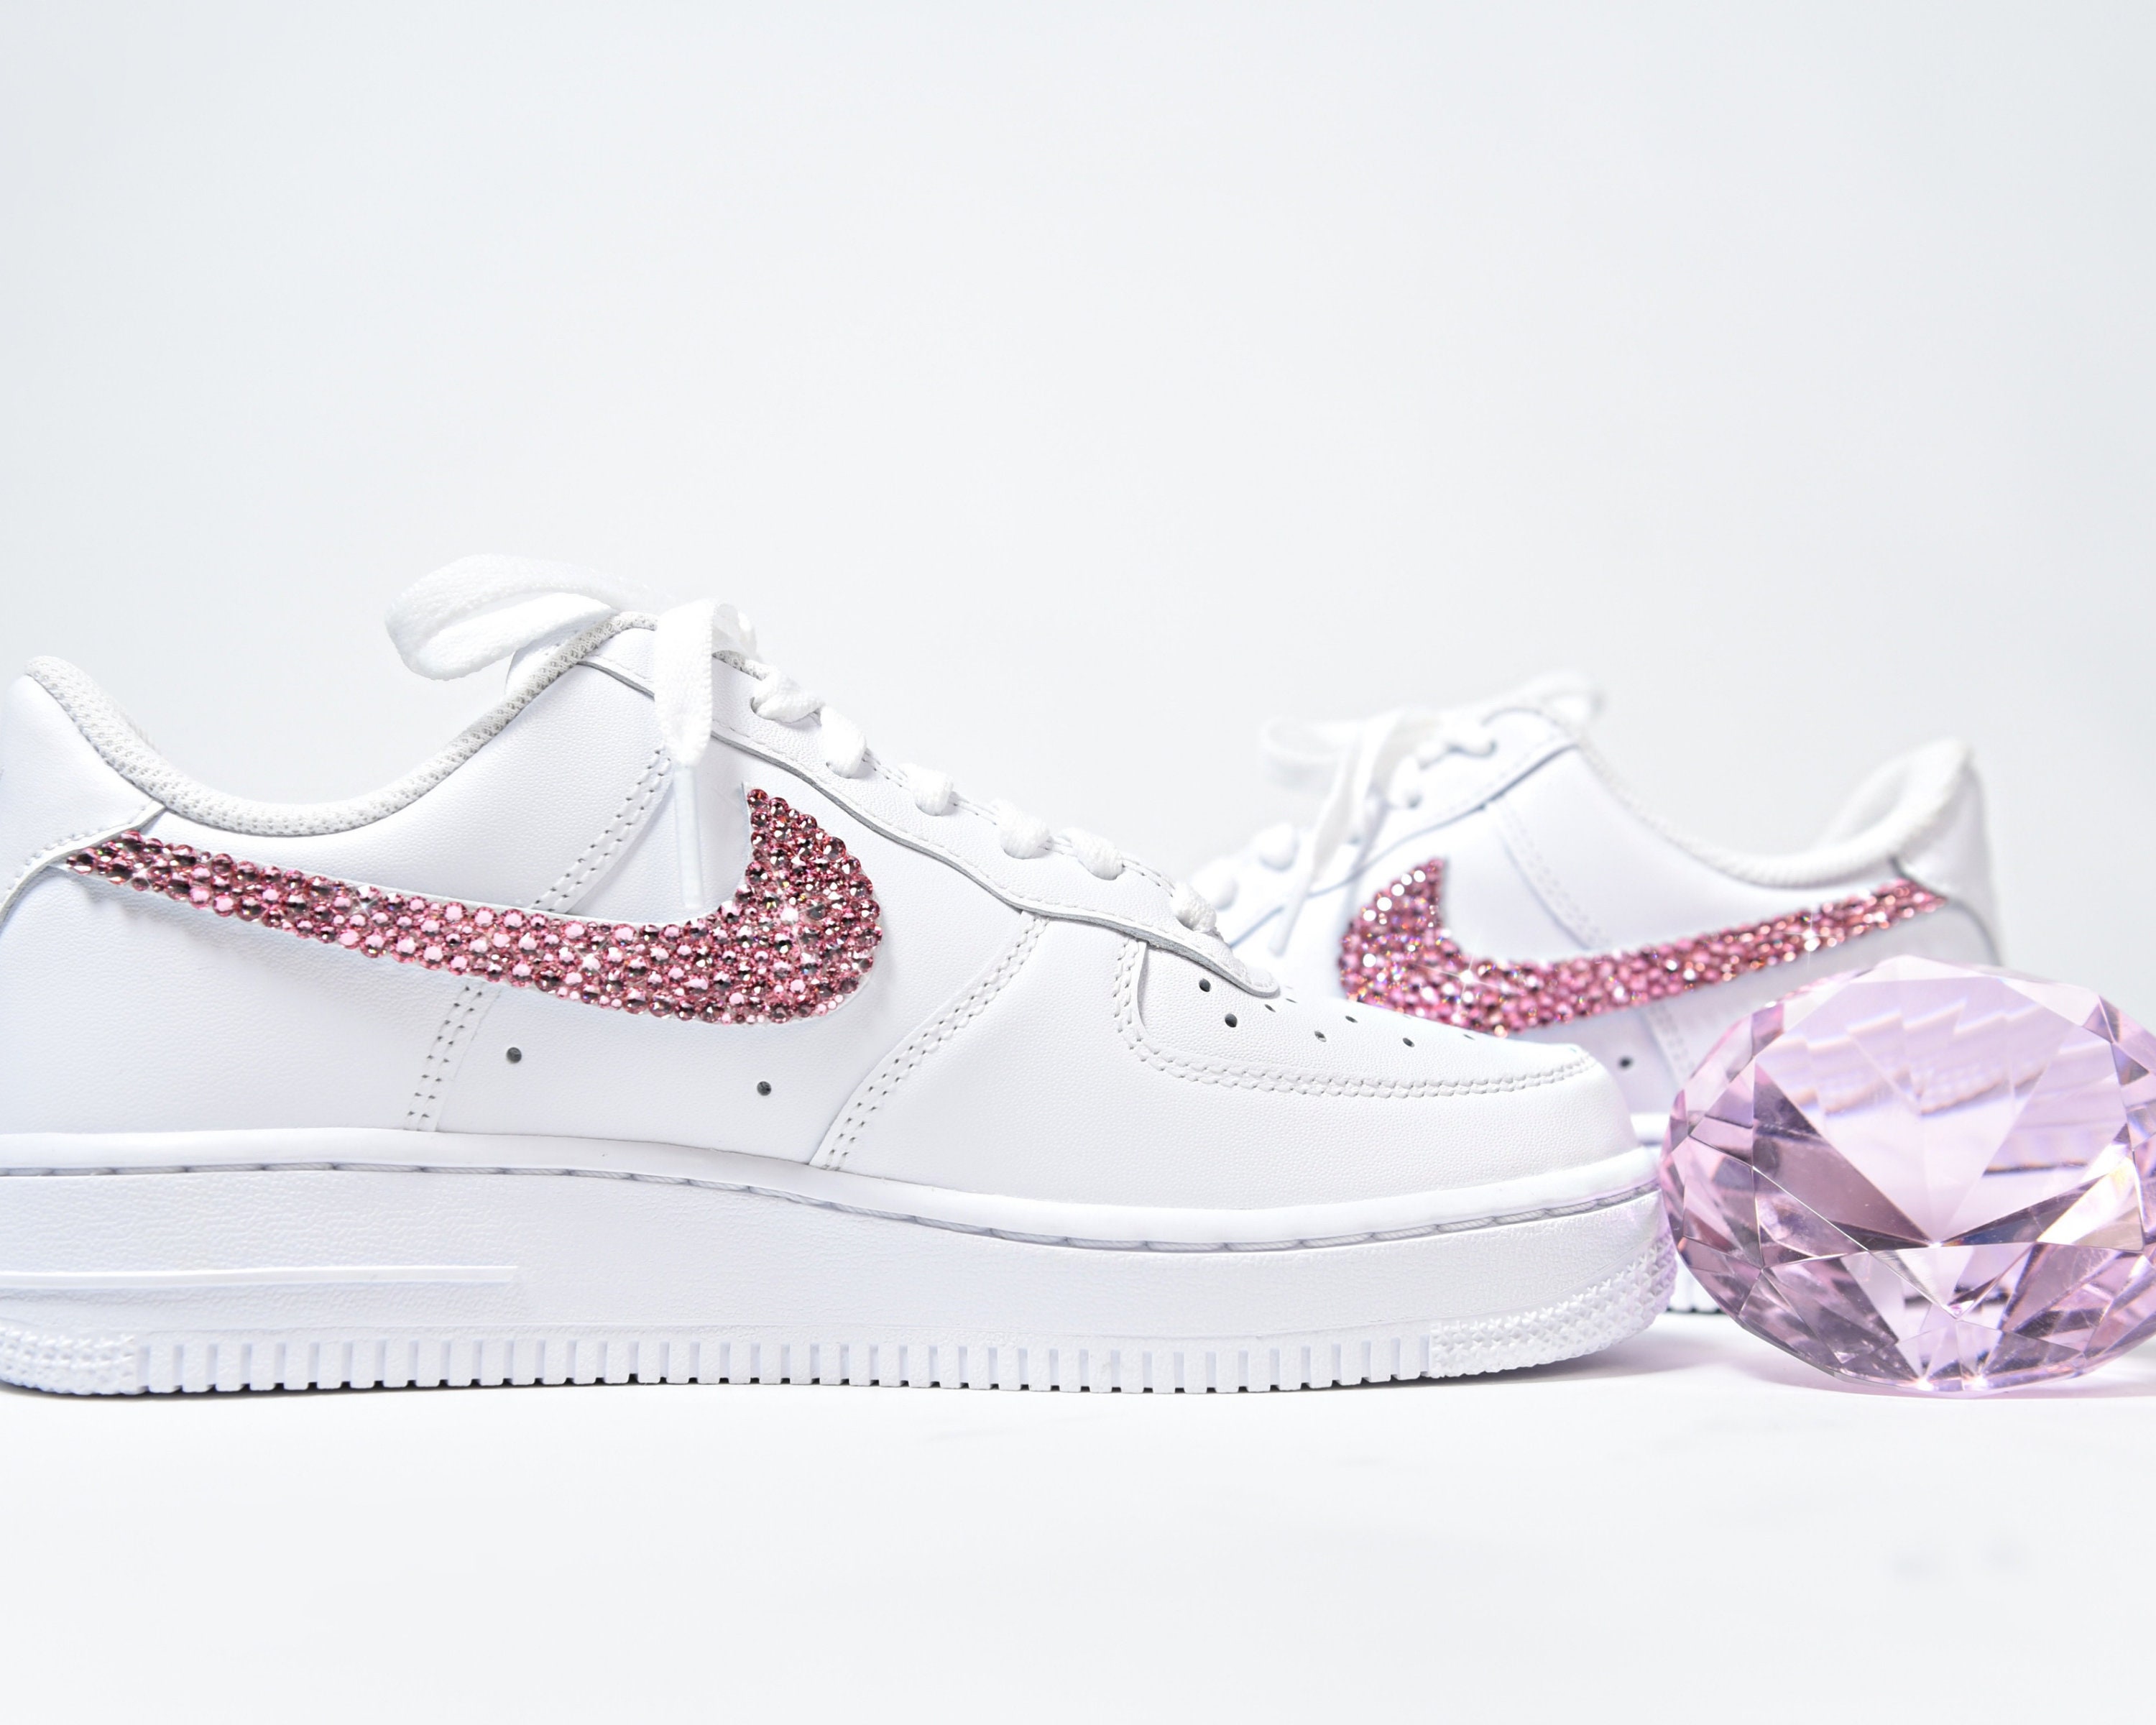 Heup chef Berouw Nike Air Force 1 With Pink Rhinestone Swoosh Logos Gifts for - Etsy